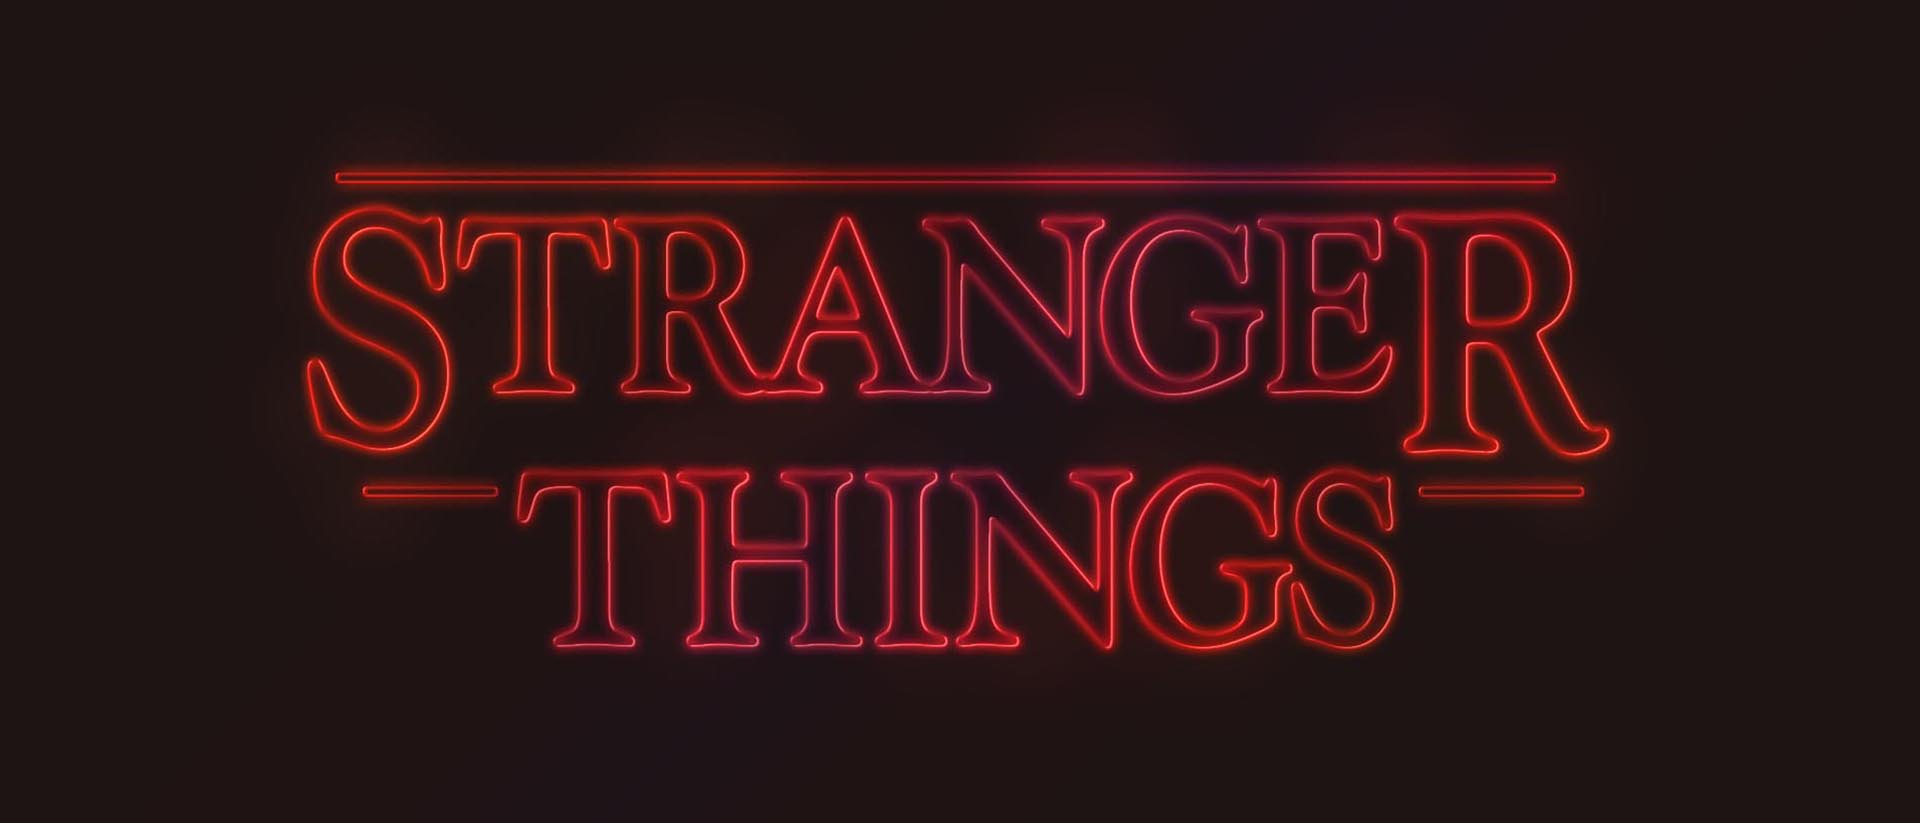 What Made the VFX in Stranger Things Believable?